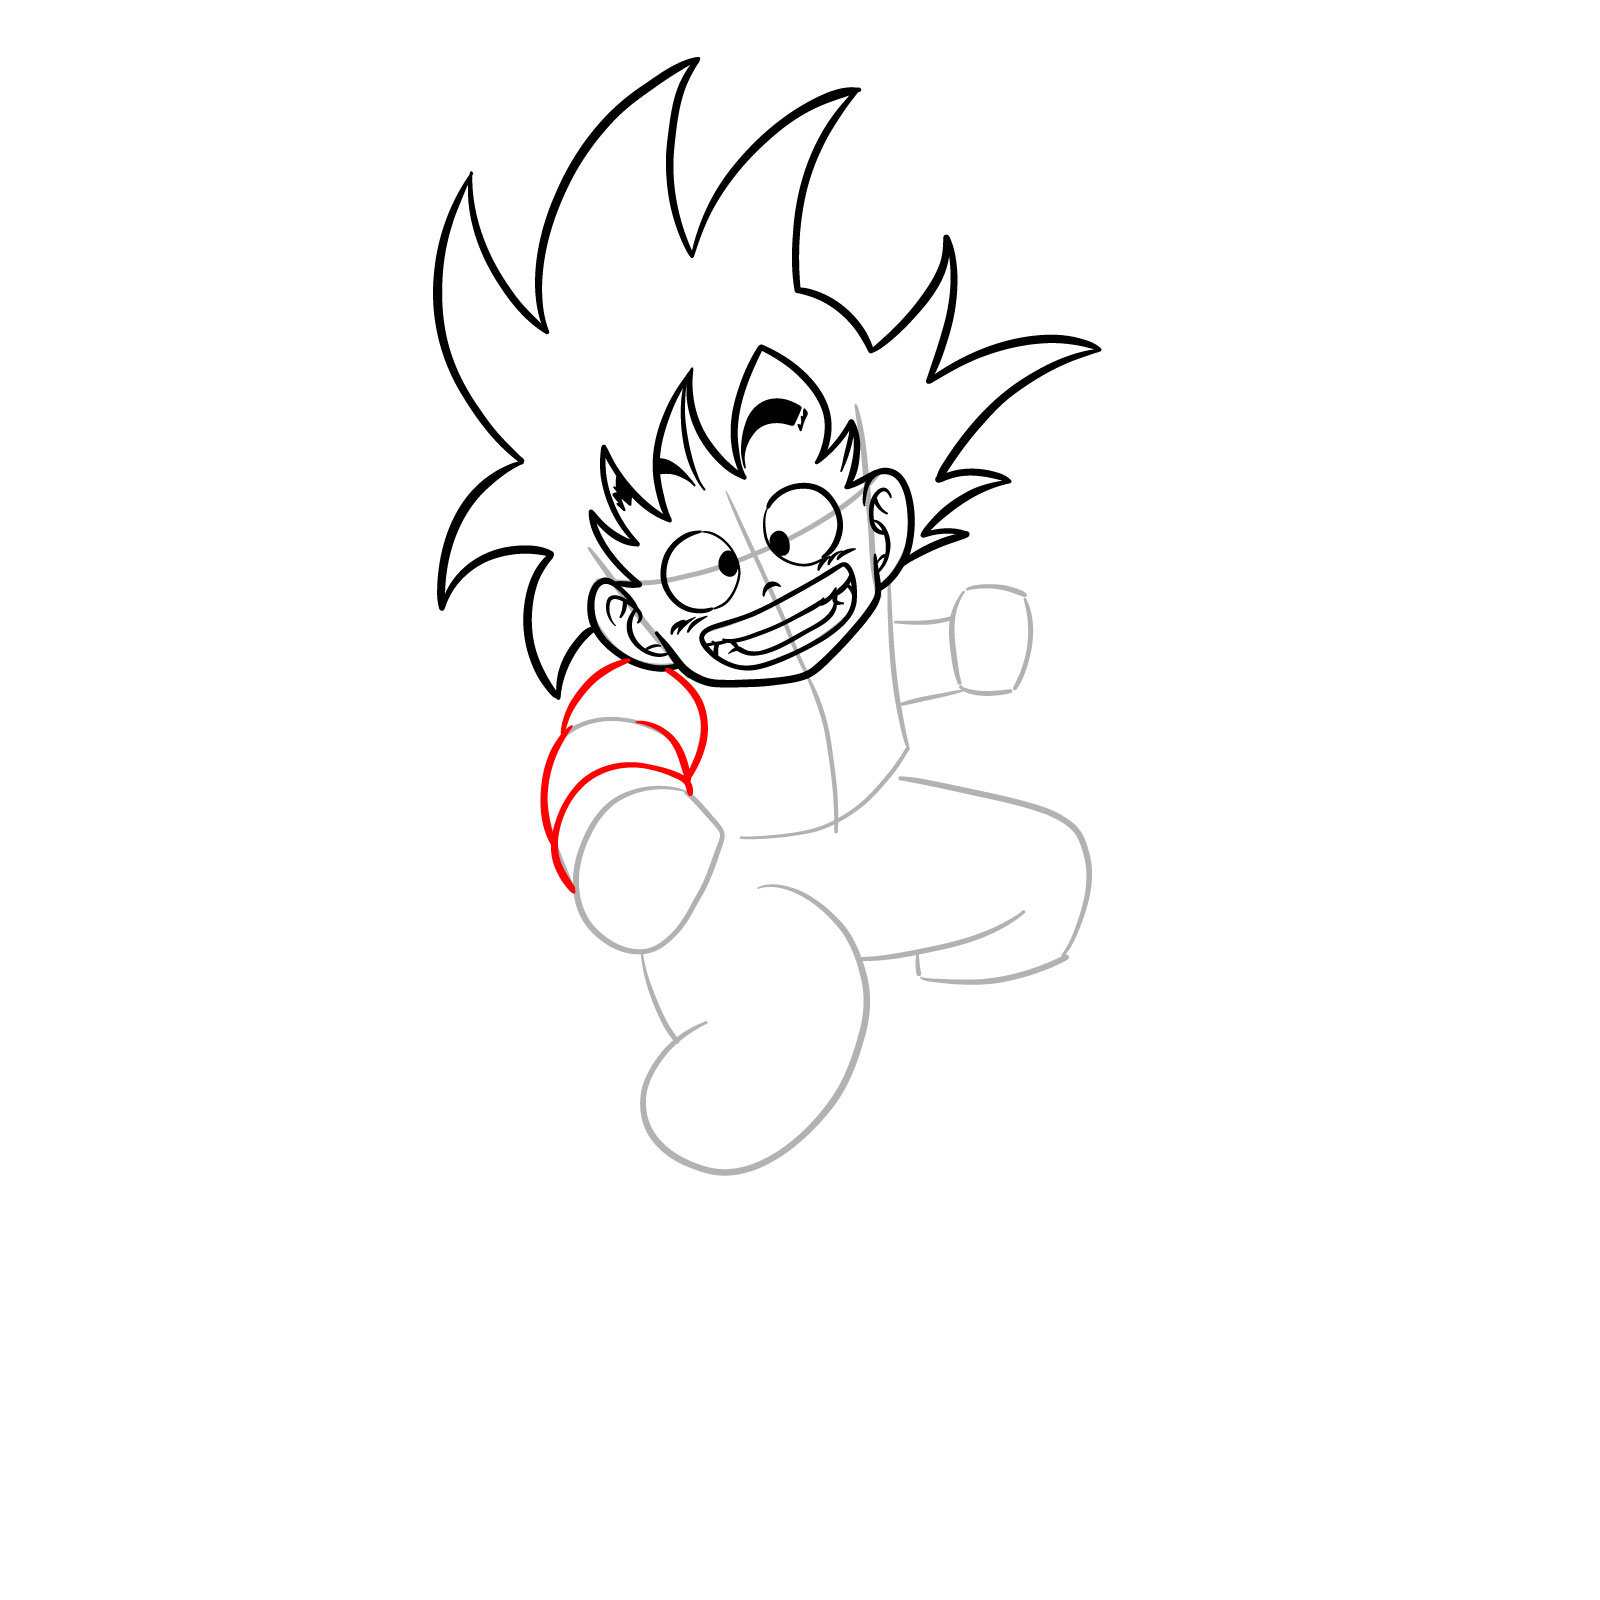 How to draw Kid Goku riding on the Flying Nimbus - step 11